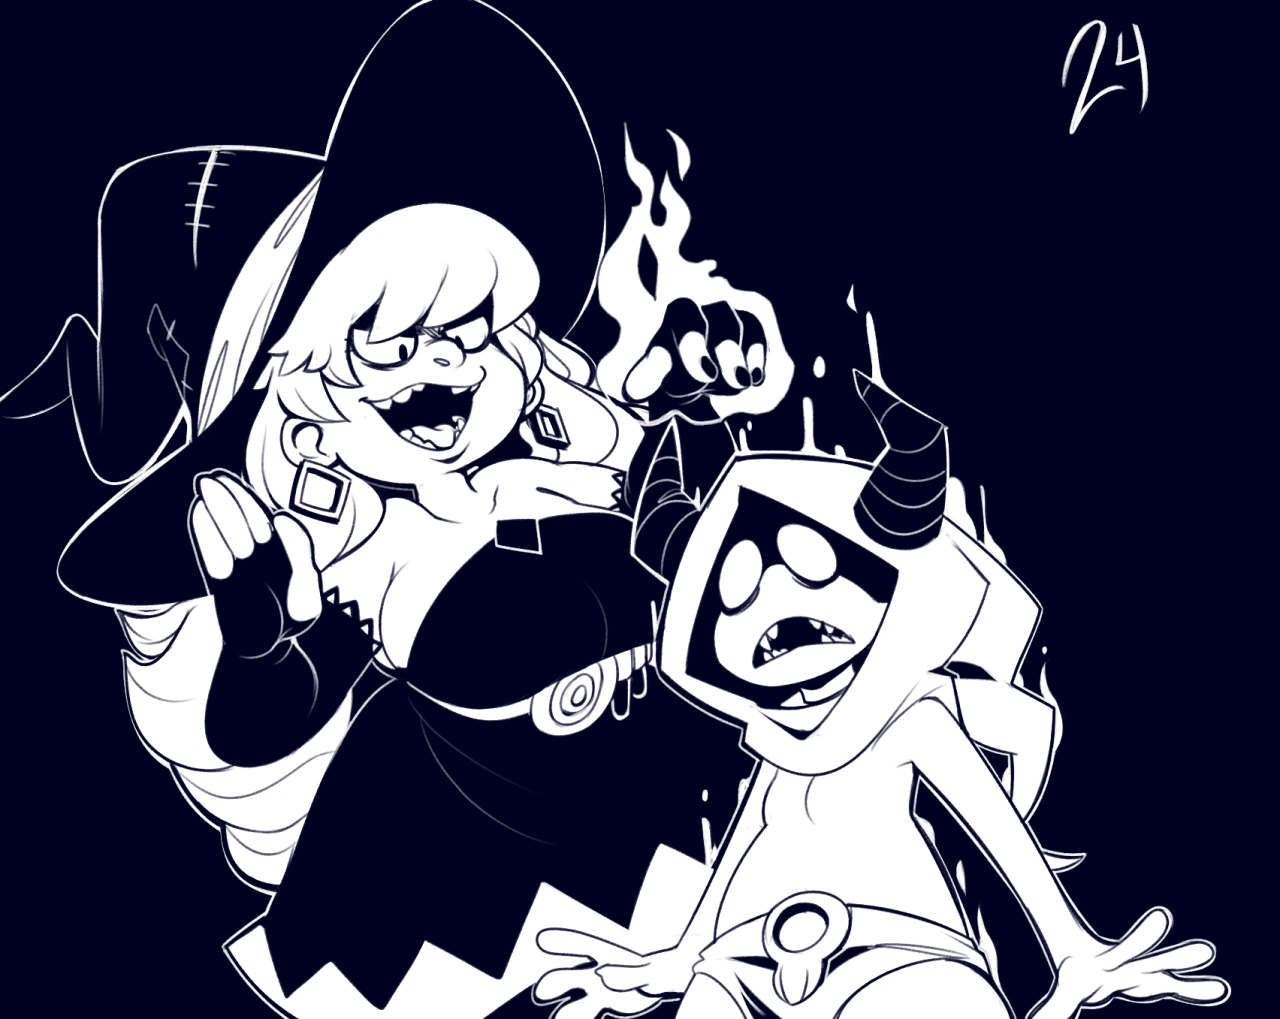 mangneto:  I really like drawing this witch chick! Kinda with i started earlier,